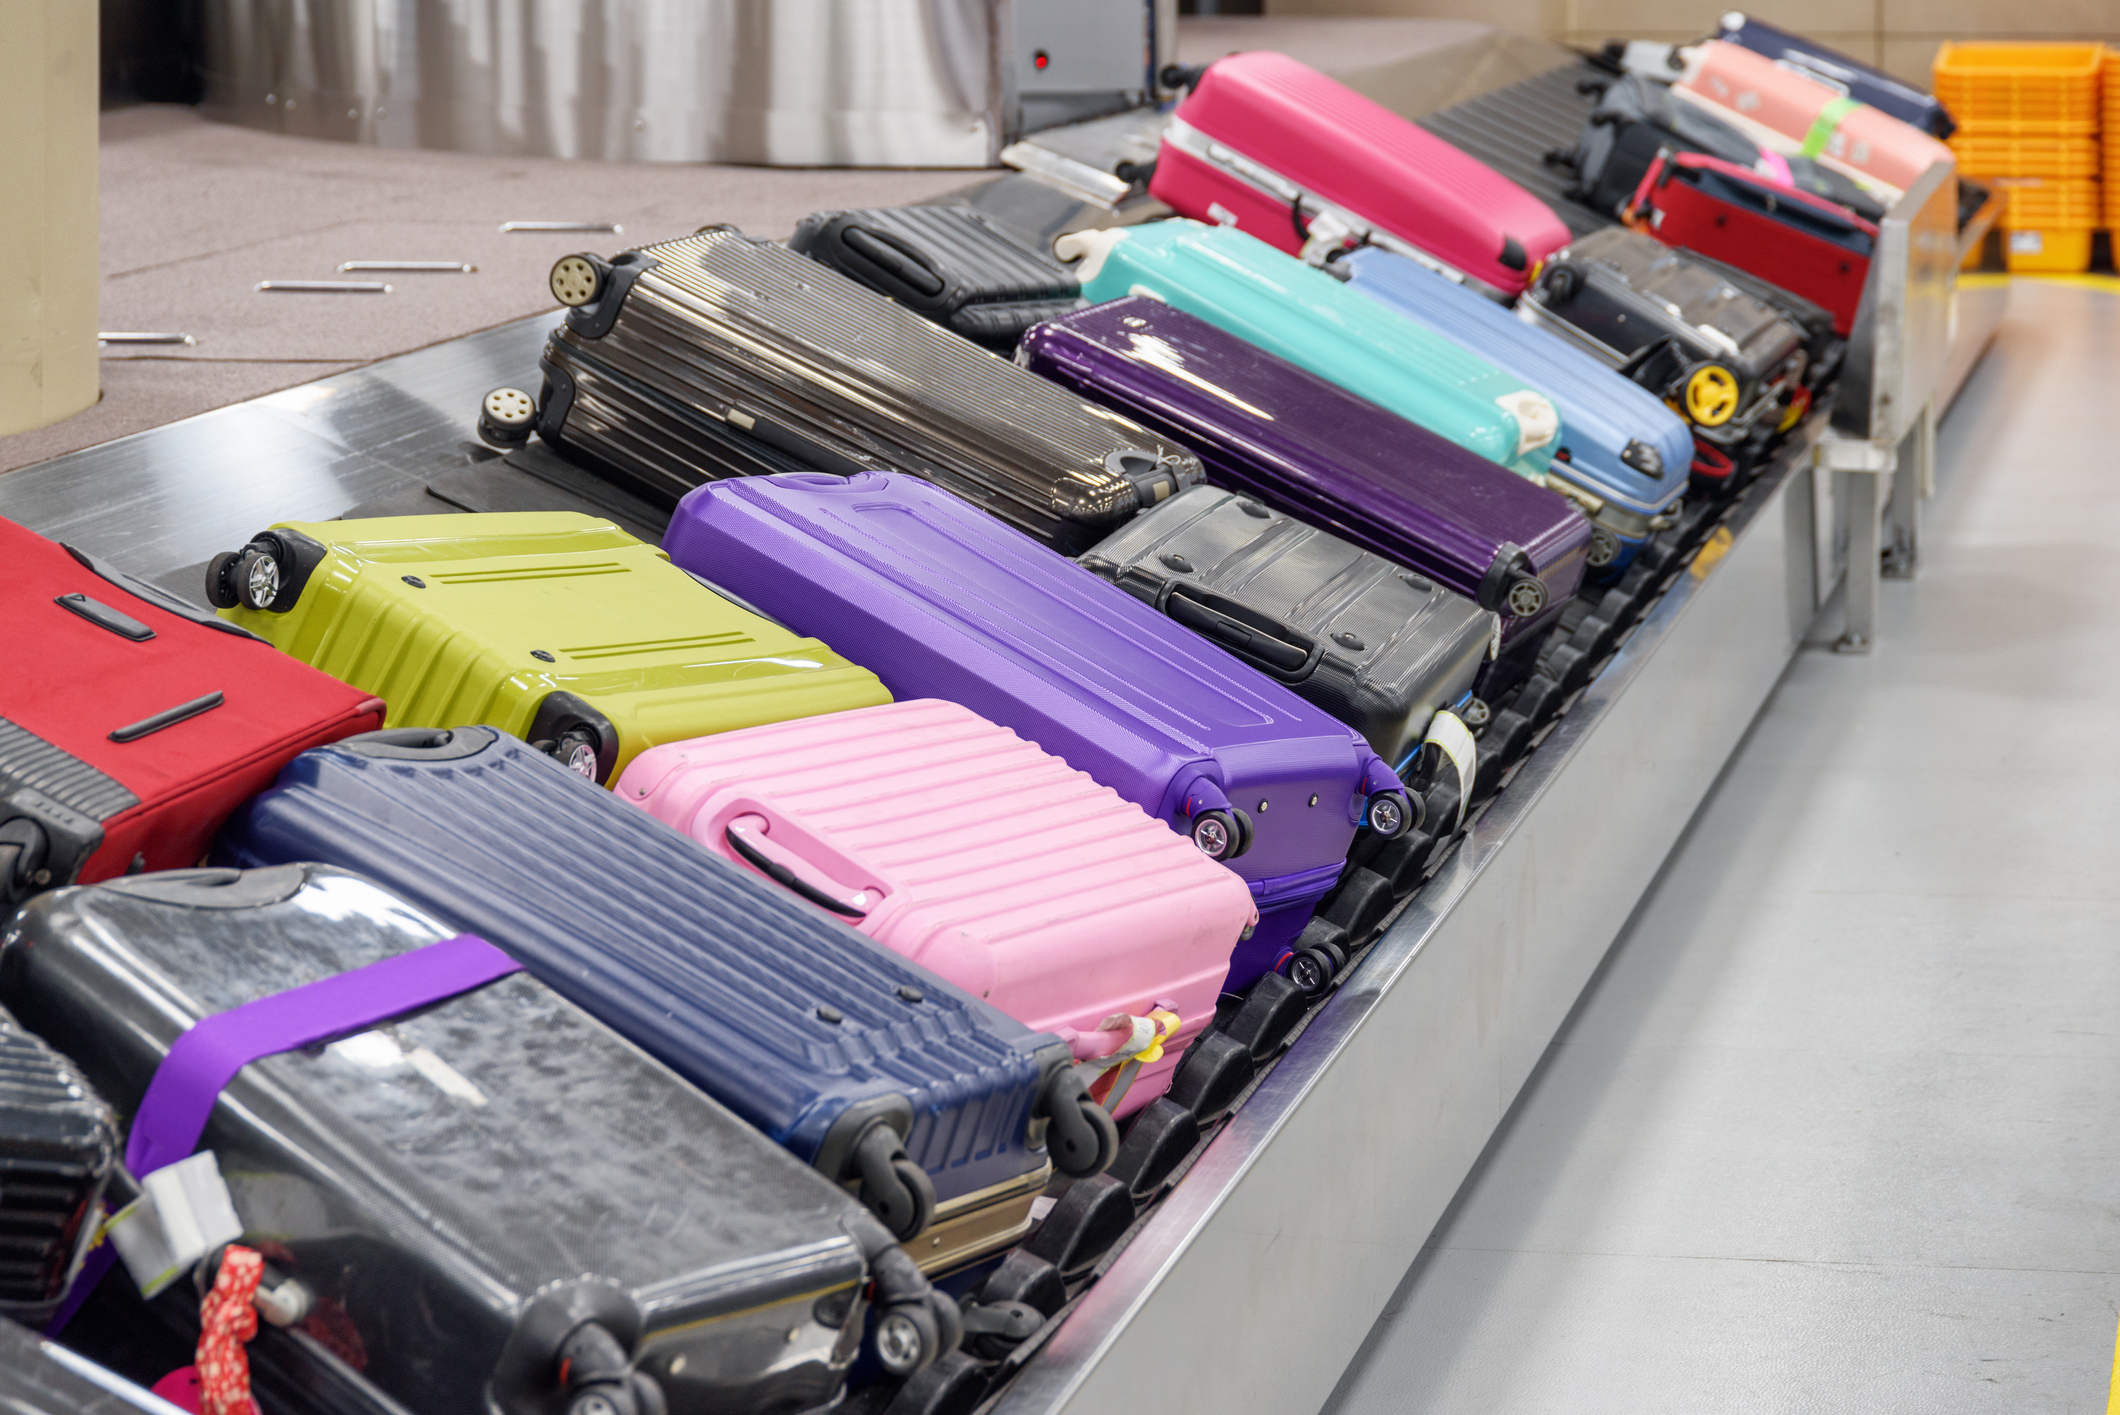 Suitcases pile up in large quantity on a baggage carousel.